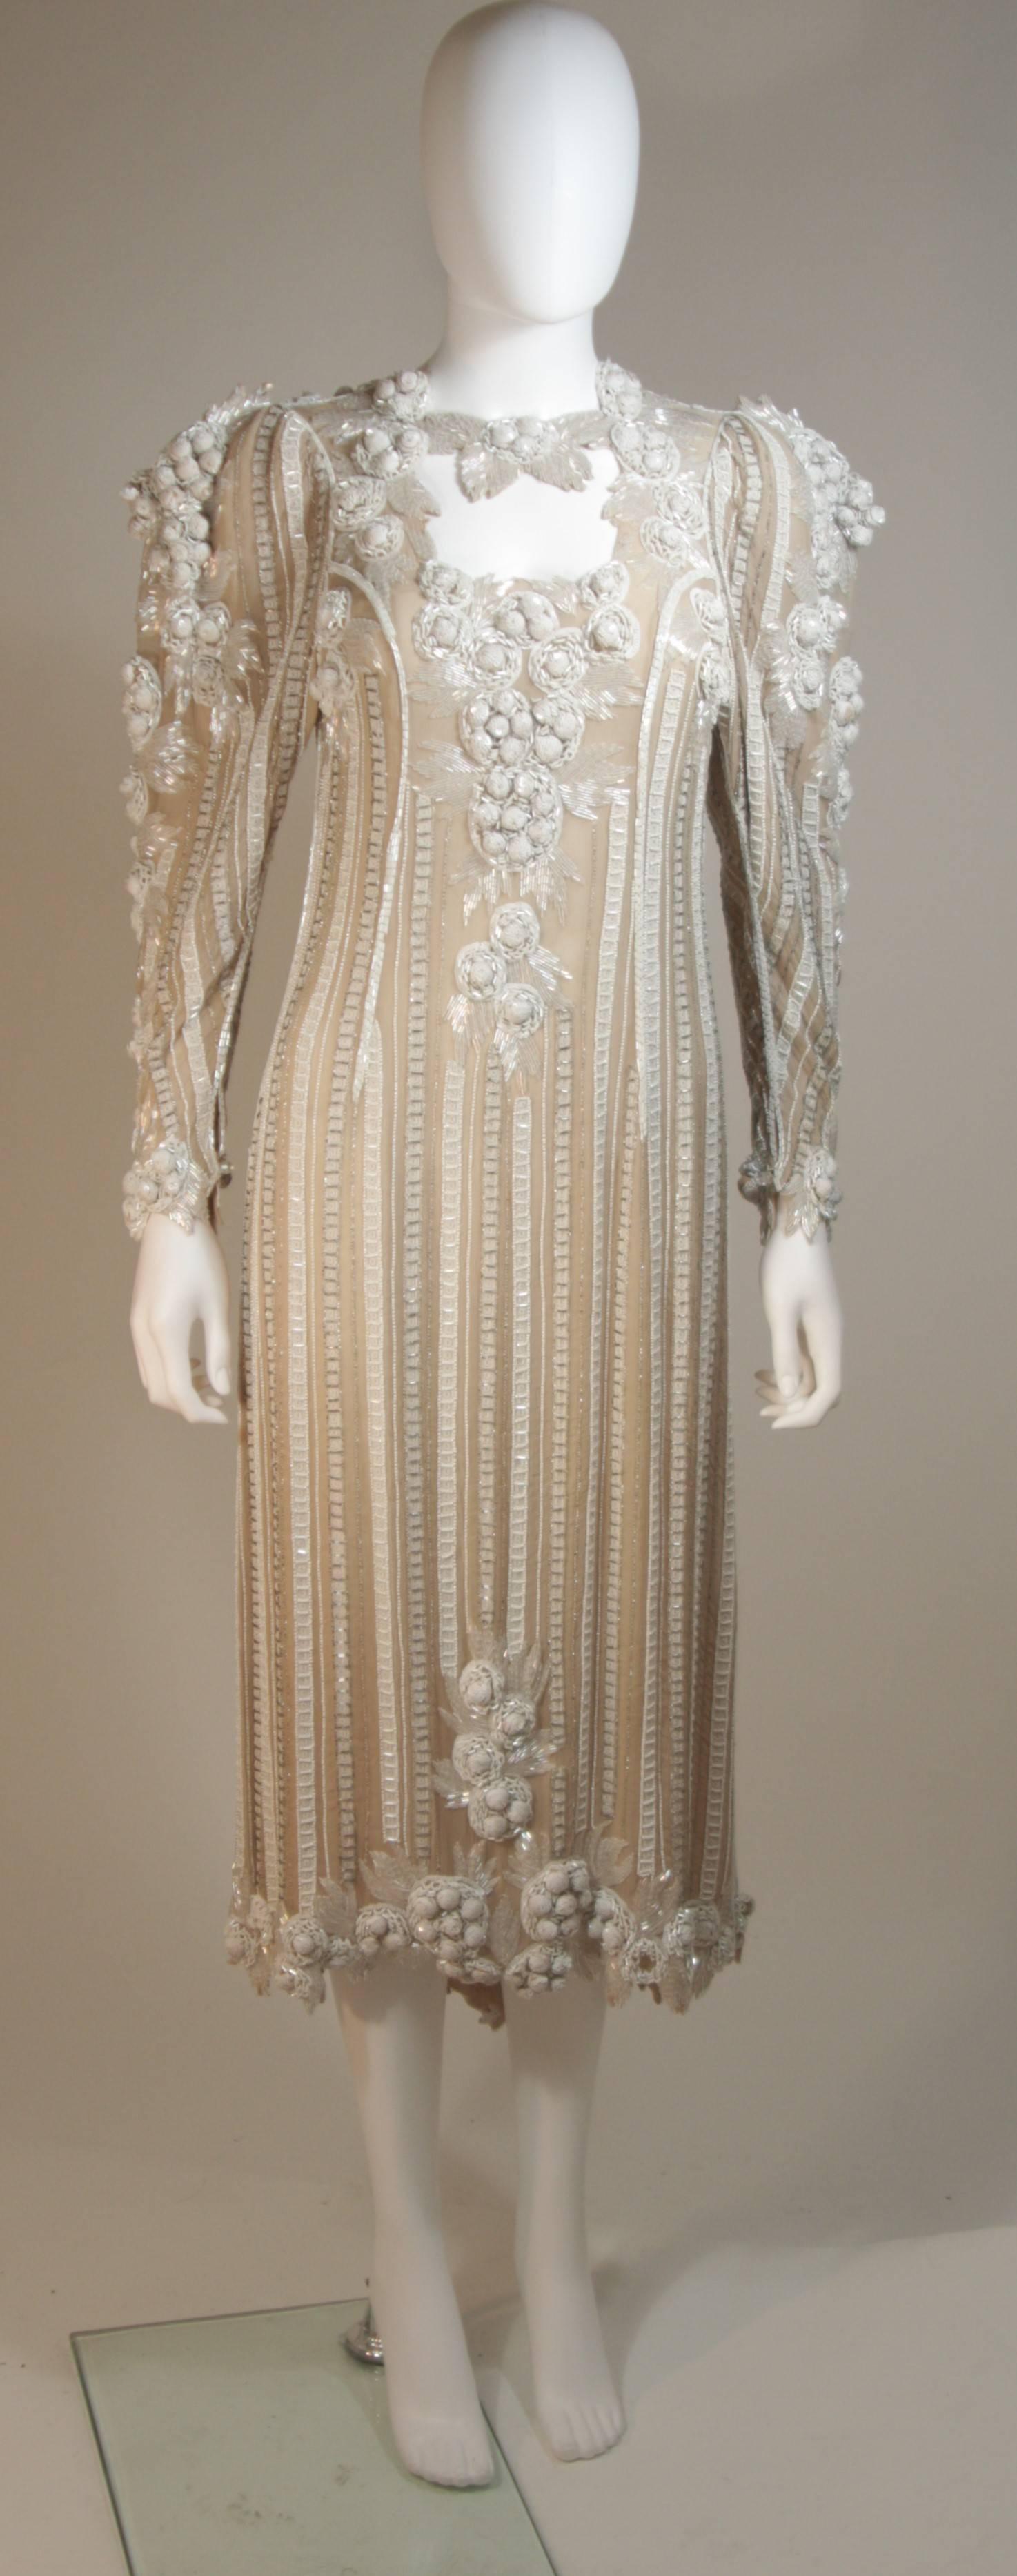  This dress is composed of a beaded ivory silk. Features amazing bead and sequin applique with relief beading and dimensional shouldler details. There are center back button closures. In great vintage condition. Made in England.

  **Please